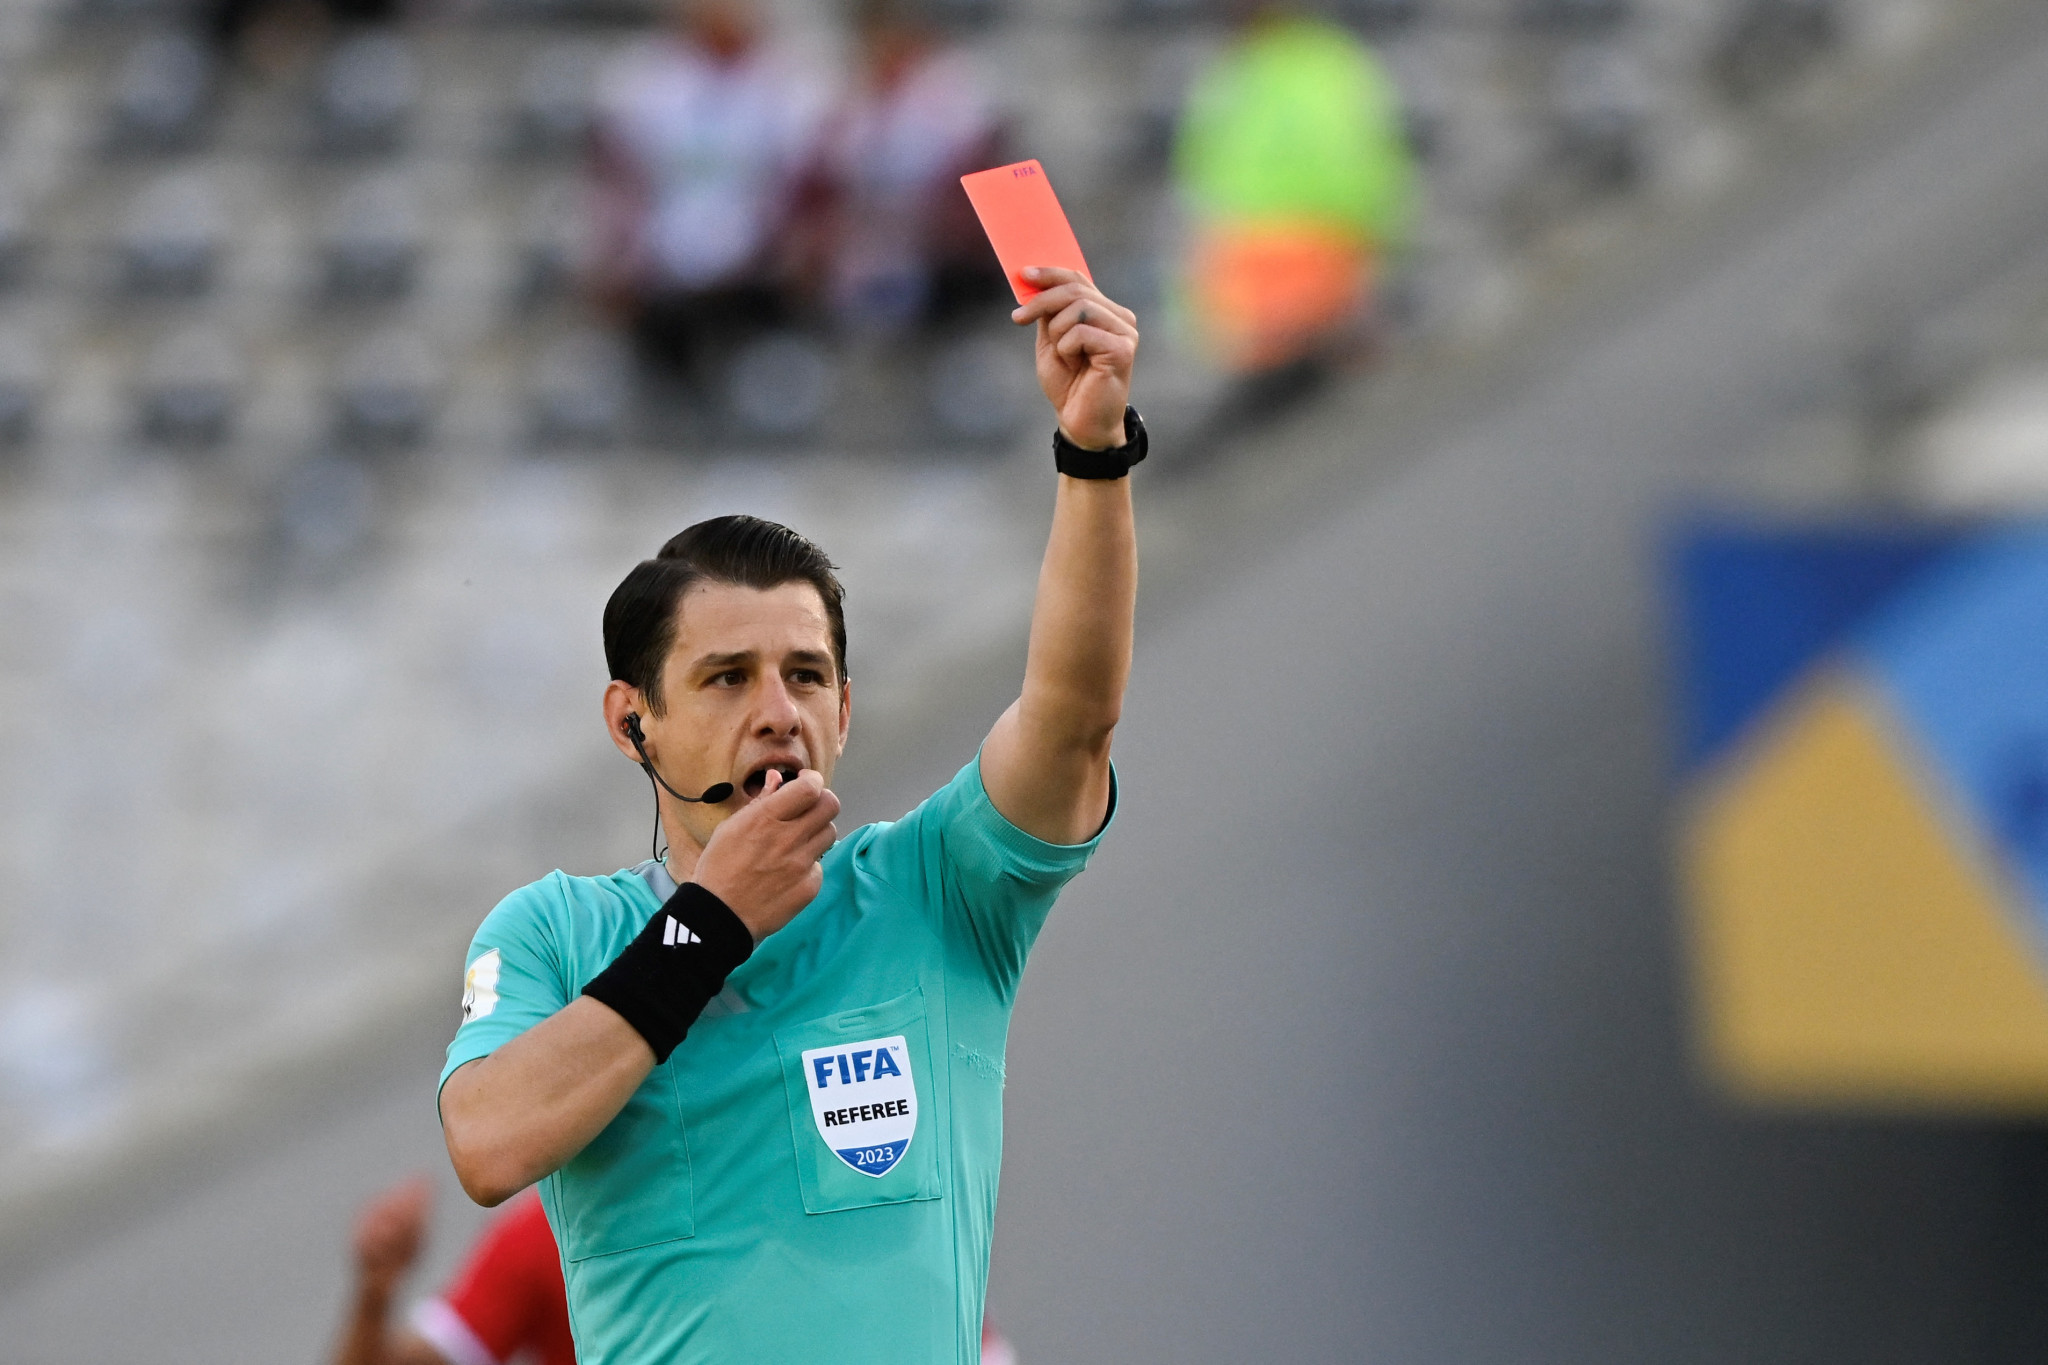 Turkish referee Halil Umut Meler shows a red card to Robert Renan during the FIFA Under-20 World Cup match between Brazil and Tunisia ©Getty Images